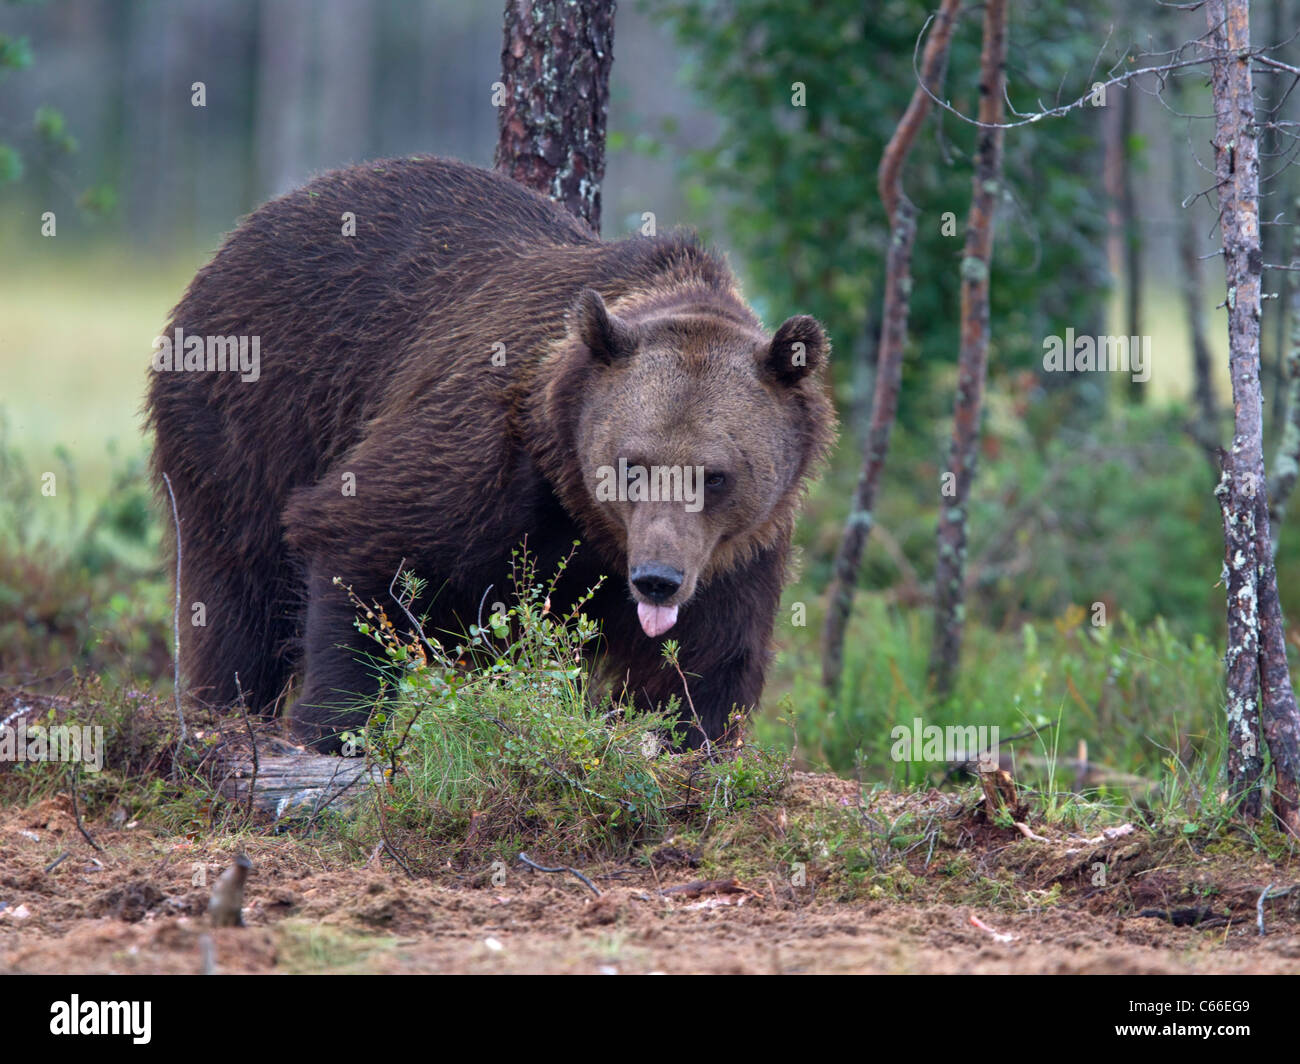 European brown bear in forest clearing Stock Photo